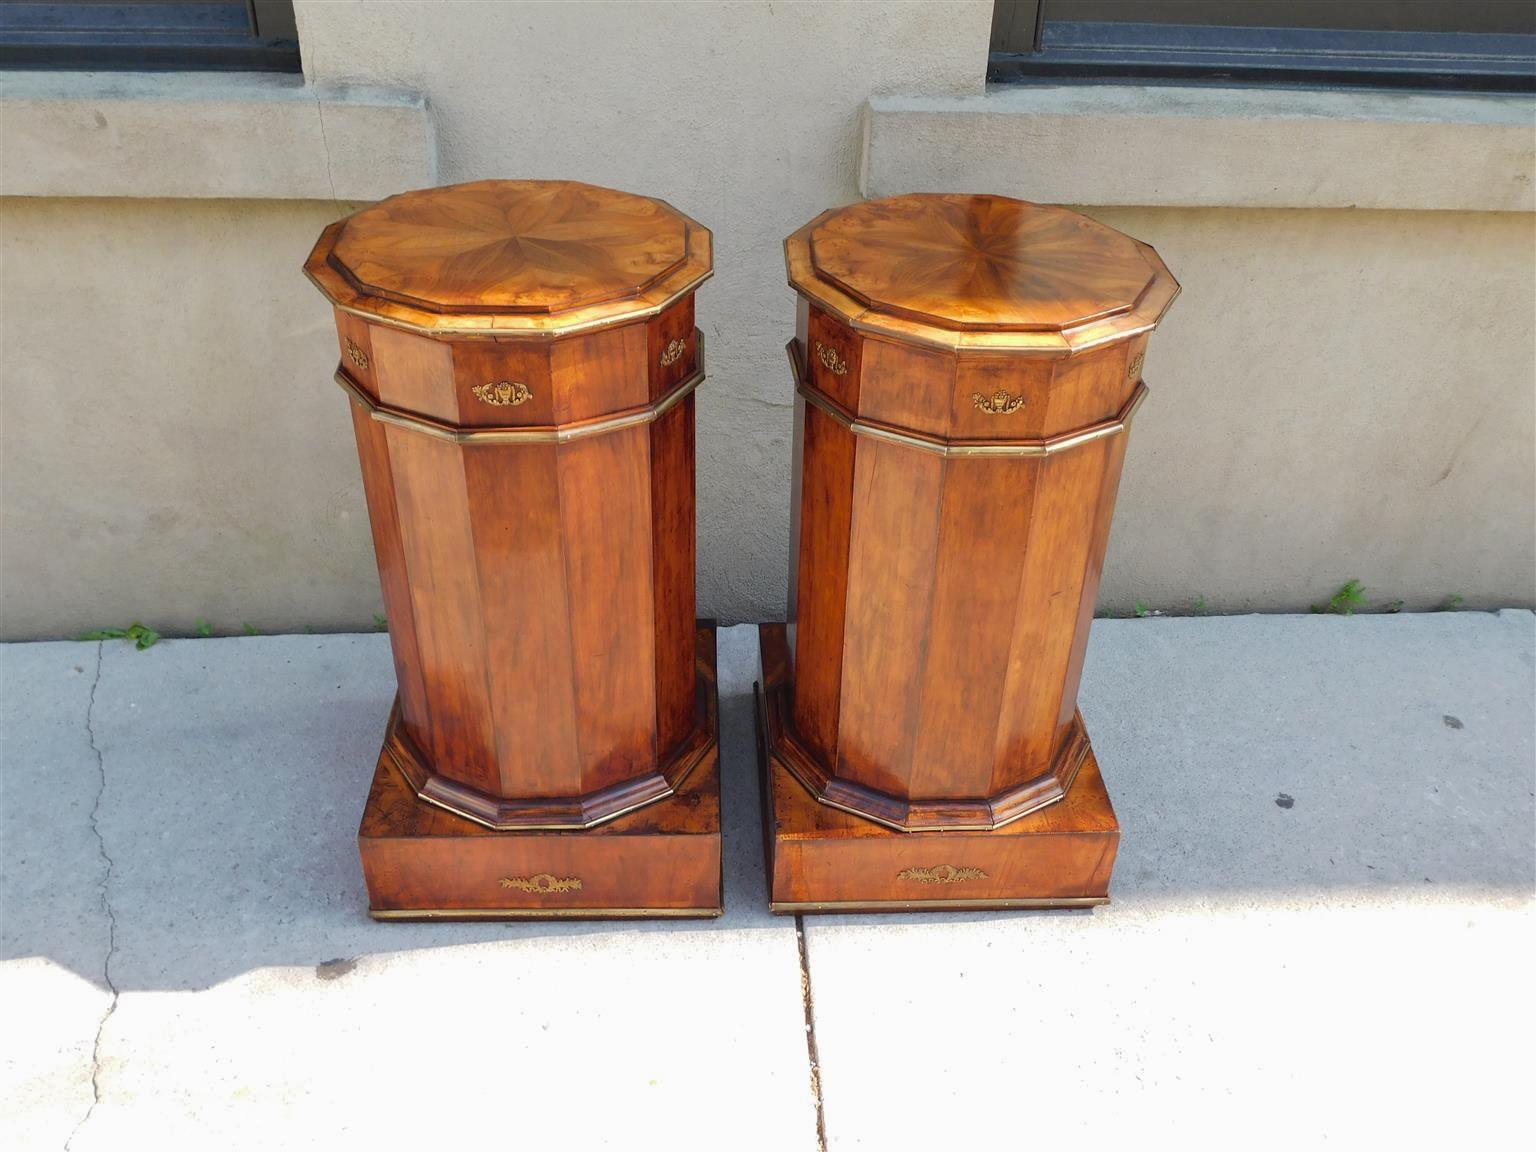 Pair of French Regency Mahogany Foliage Urn Ormolu Cabinet Commodes, Circa 1815 For Sale 3